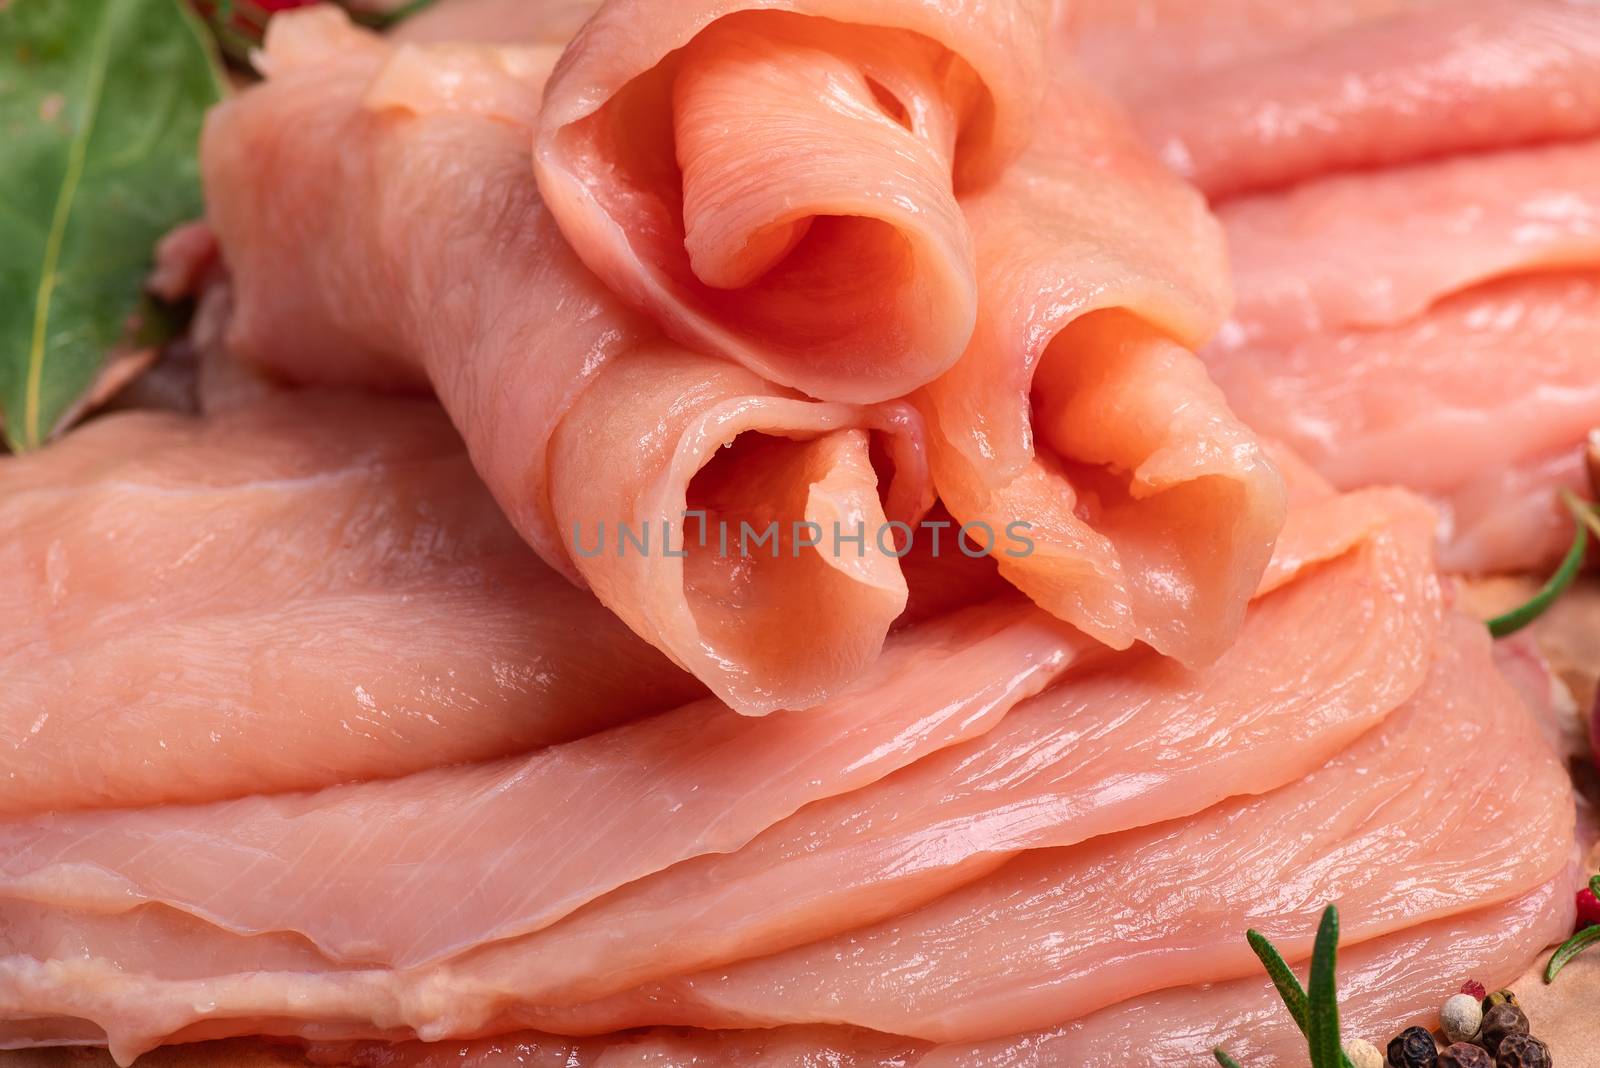 Raw sliced chicken meat close-up. Sotilissimo. Delicious dietary meat. Cooking.Close-up view of raw, fresh, choped and sliced chicken meat. by nkooume